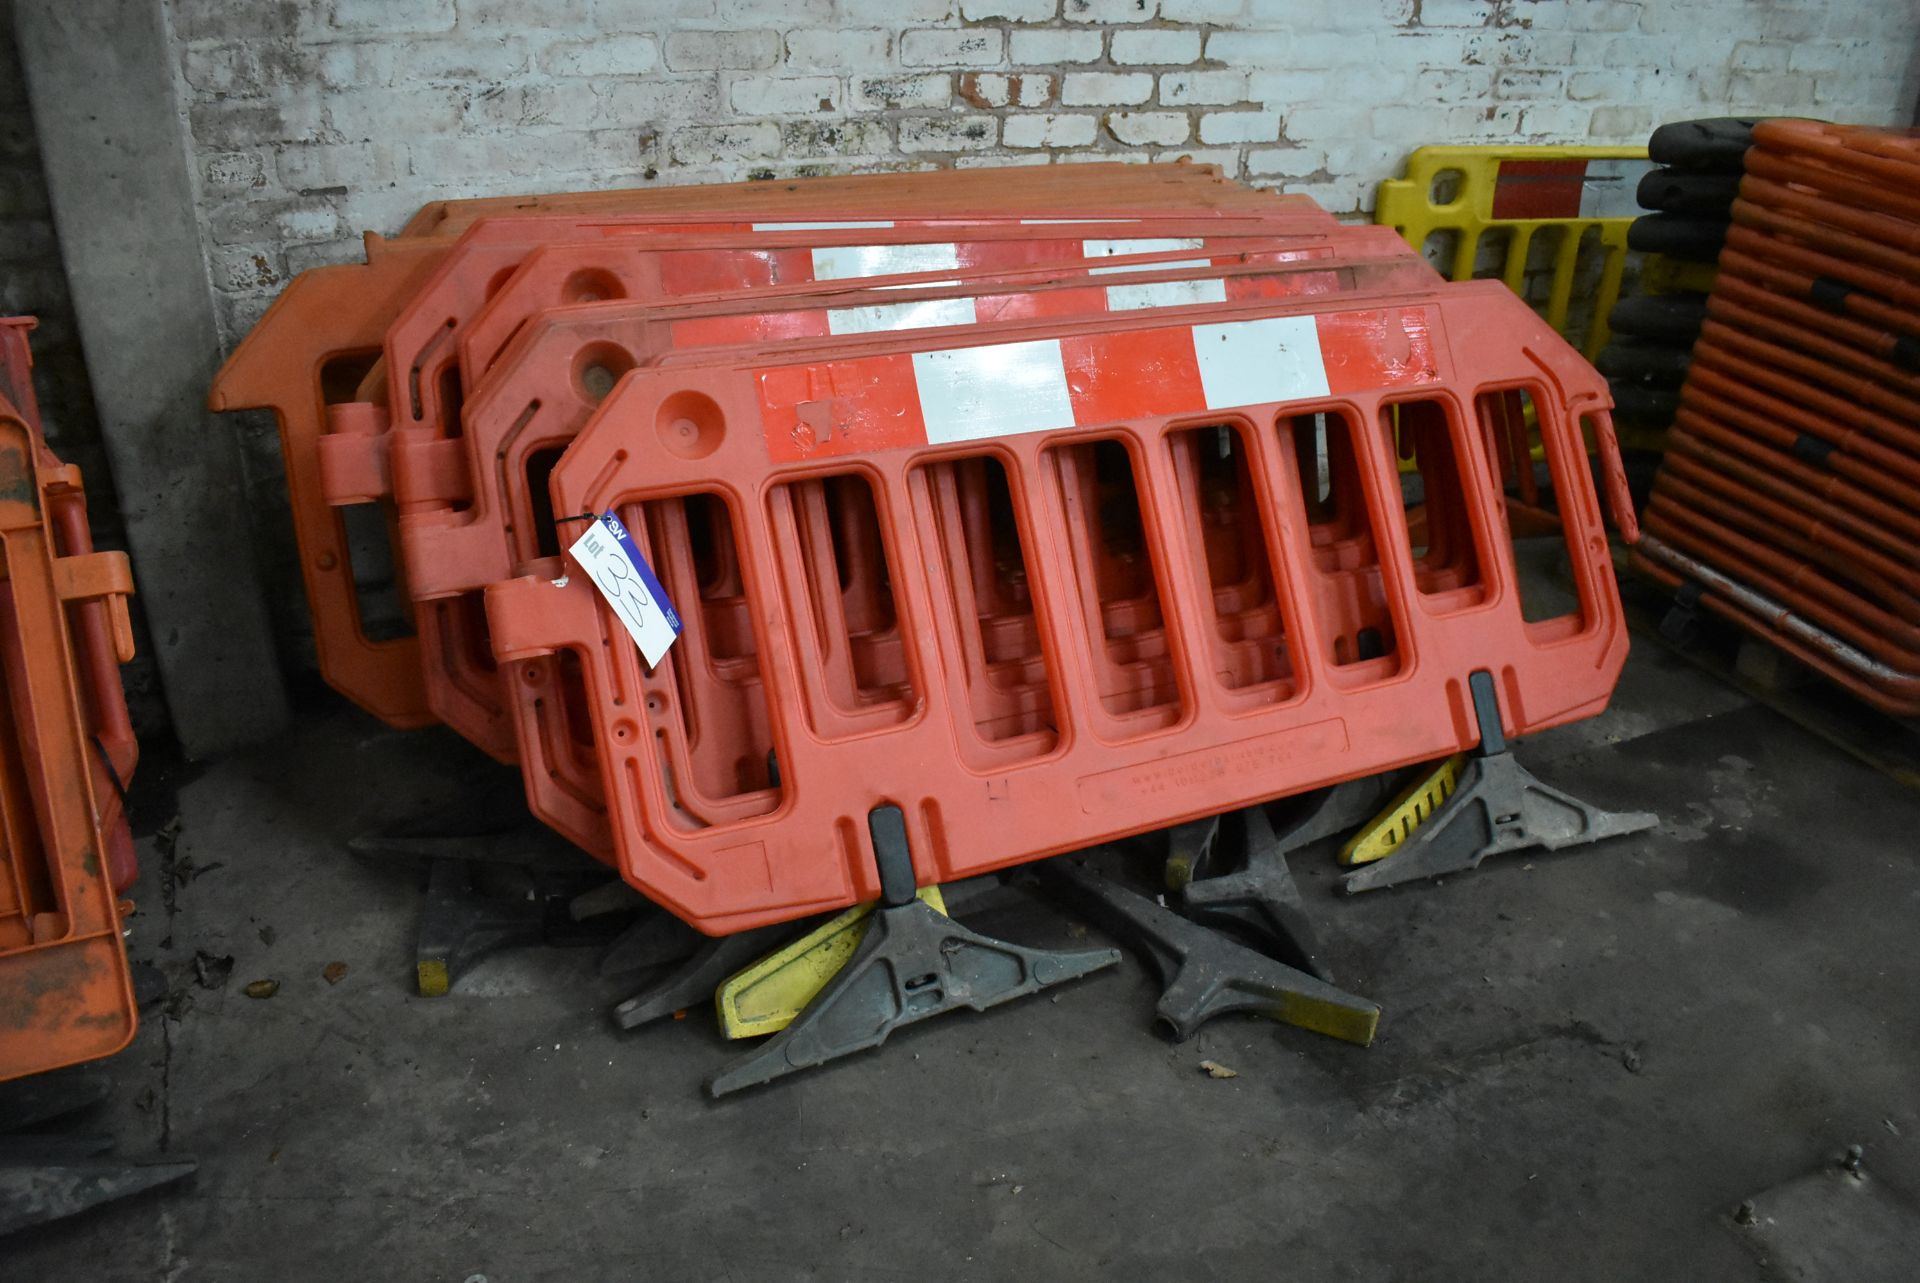 Approx. 14 Assorted Plastic Barriers, up to approx. 1.9m long